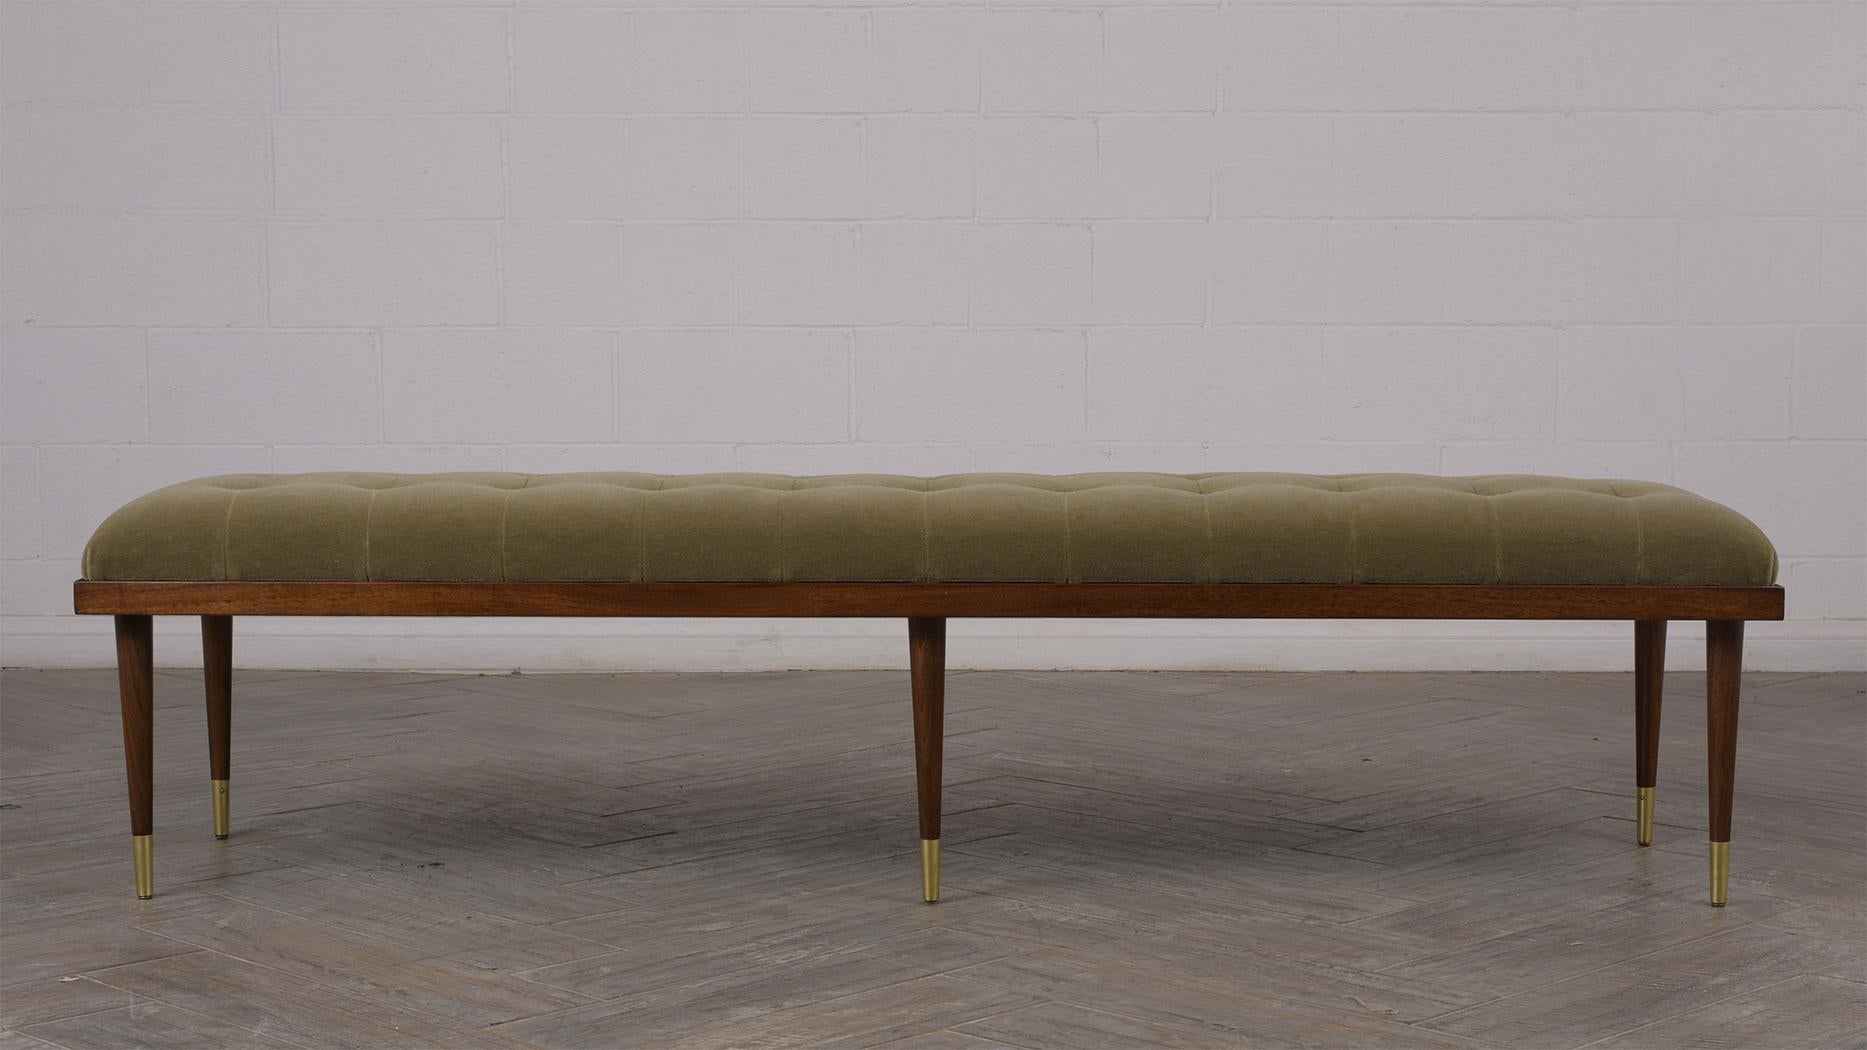 This Mid-Century Modern Bench features professionally upholstered in a green Mohair fabric with a tufted square design and top stitch detail. The bench rests on six solid teak wood legs stained in stunning dark walnut color and has polished brass